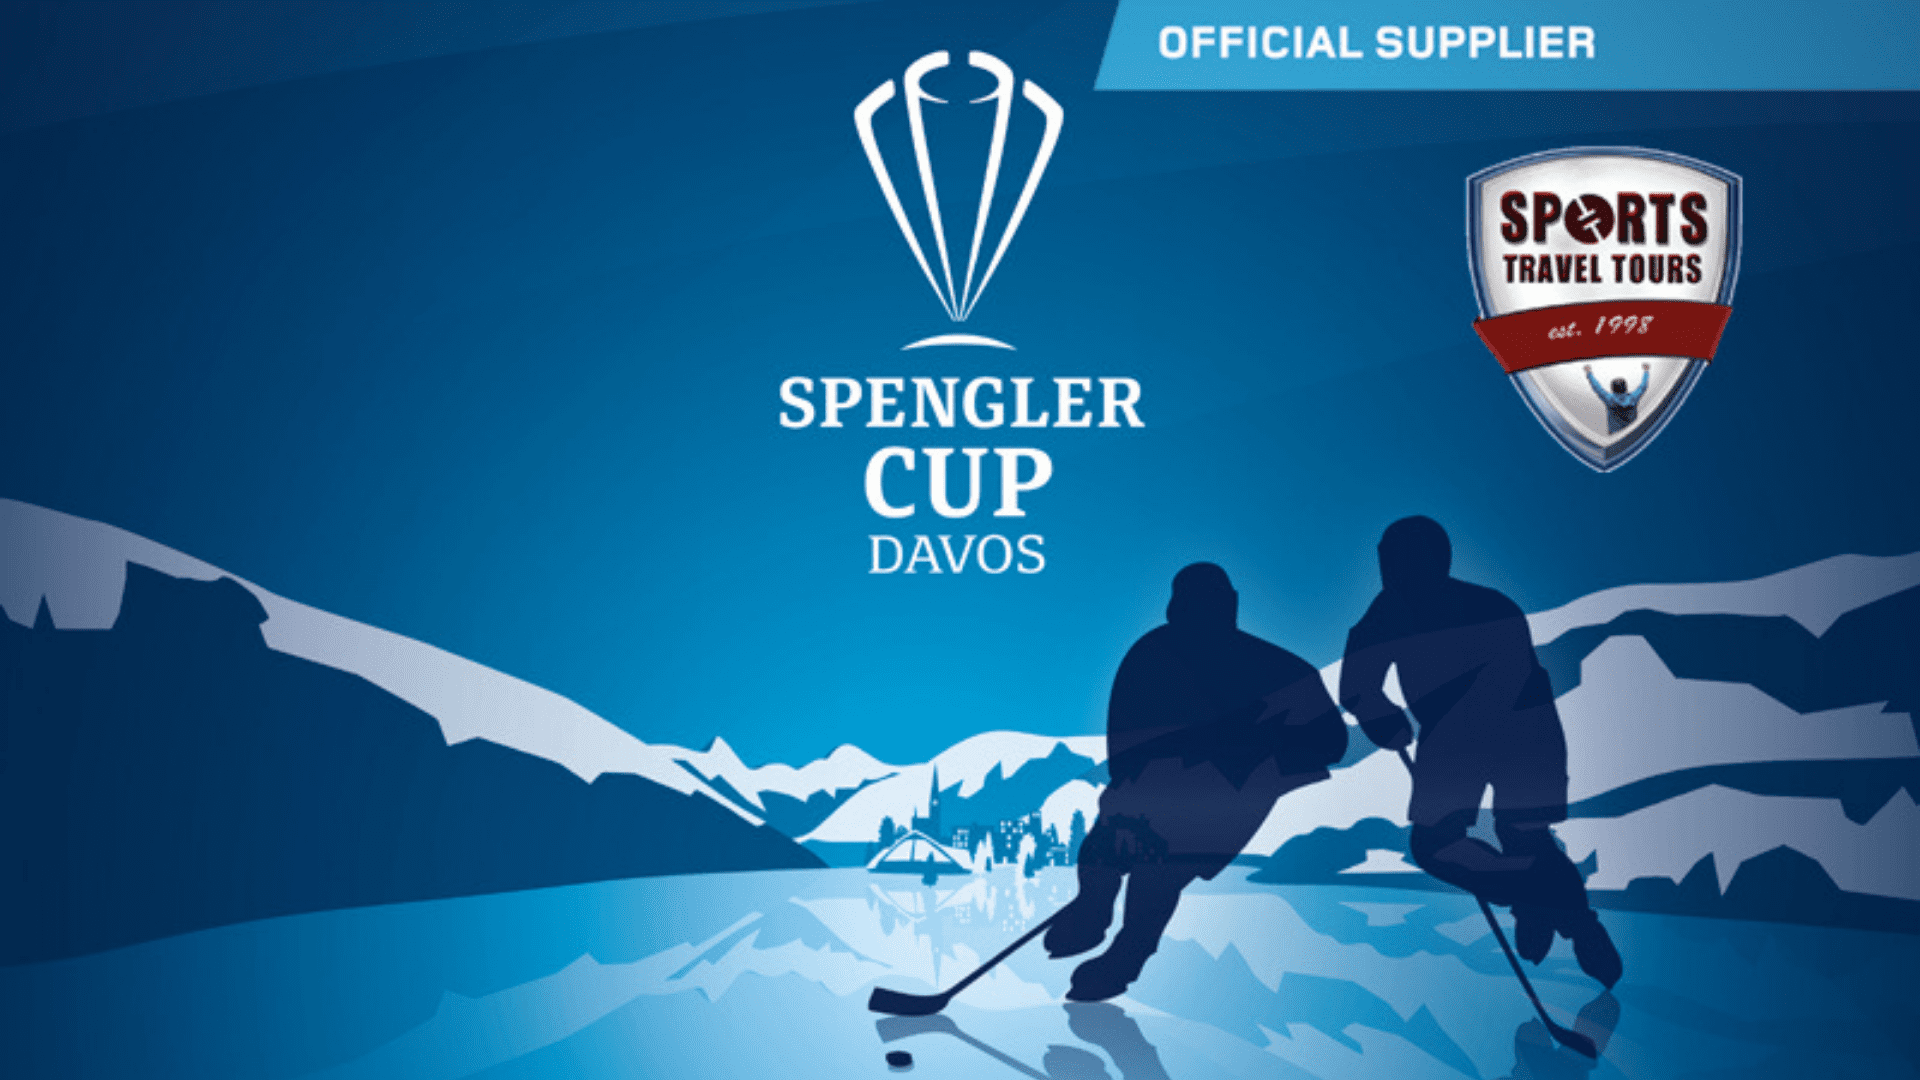 What is the Spengler Cup and why is it important?